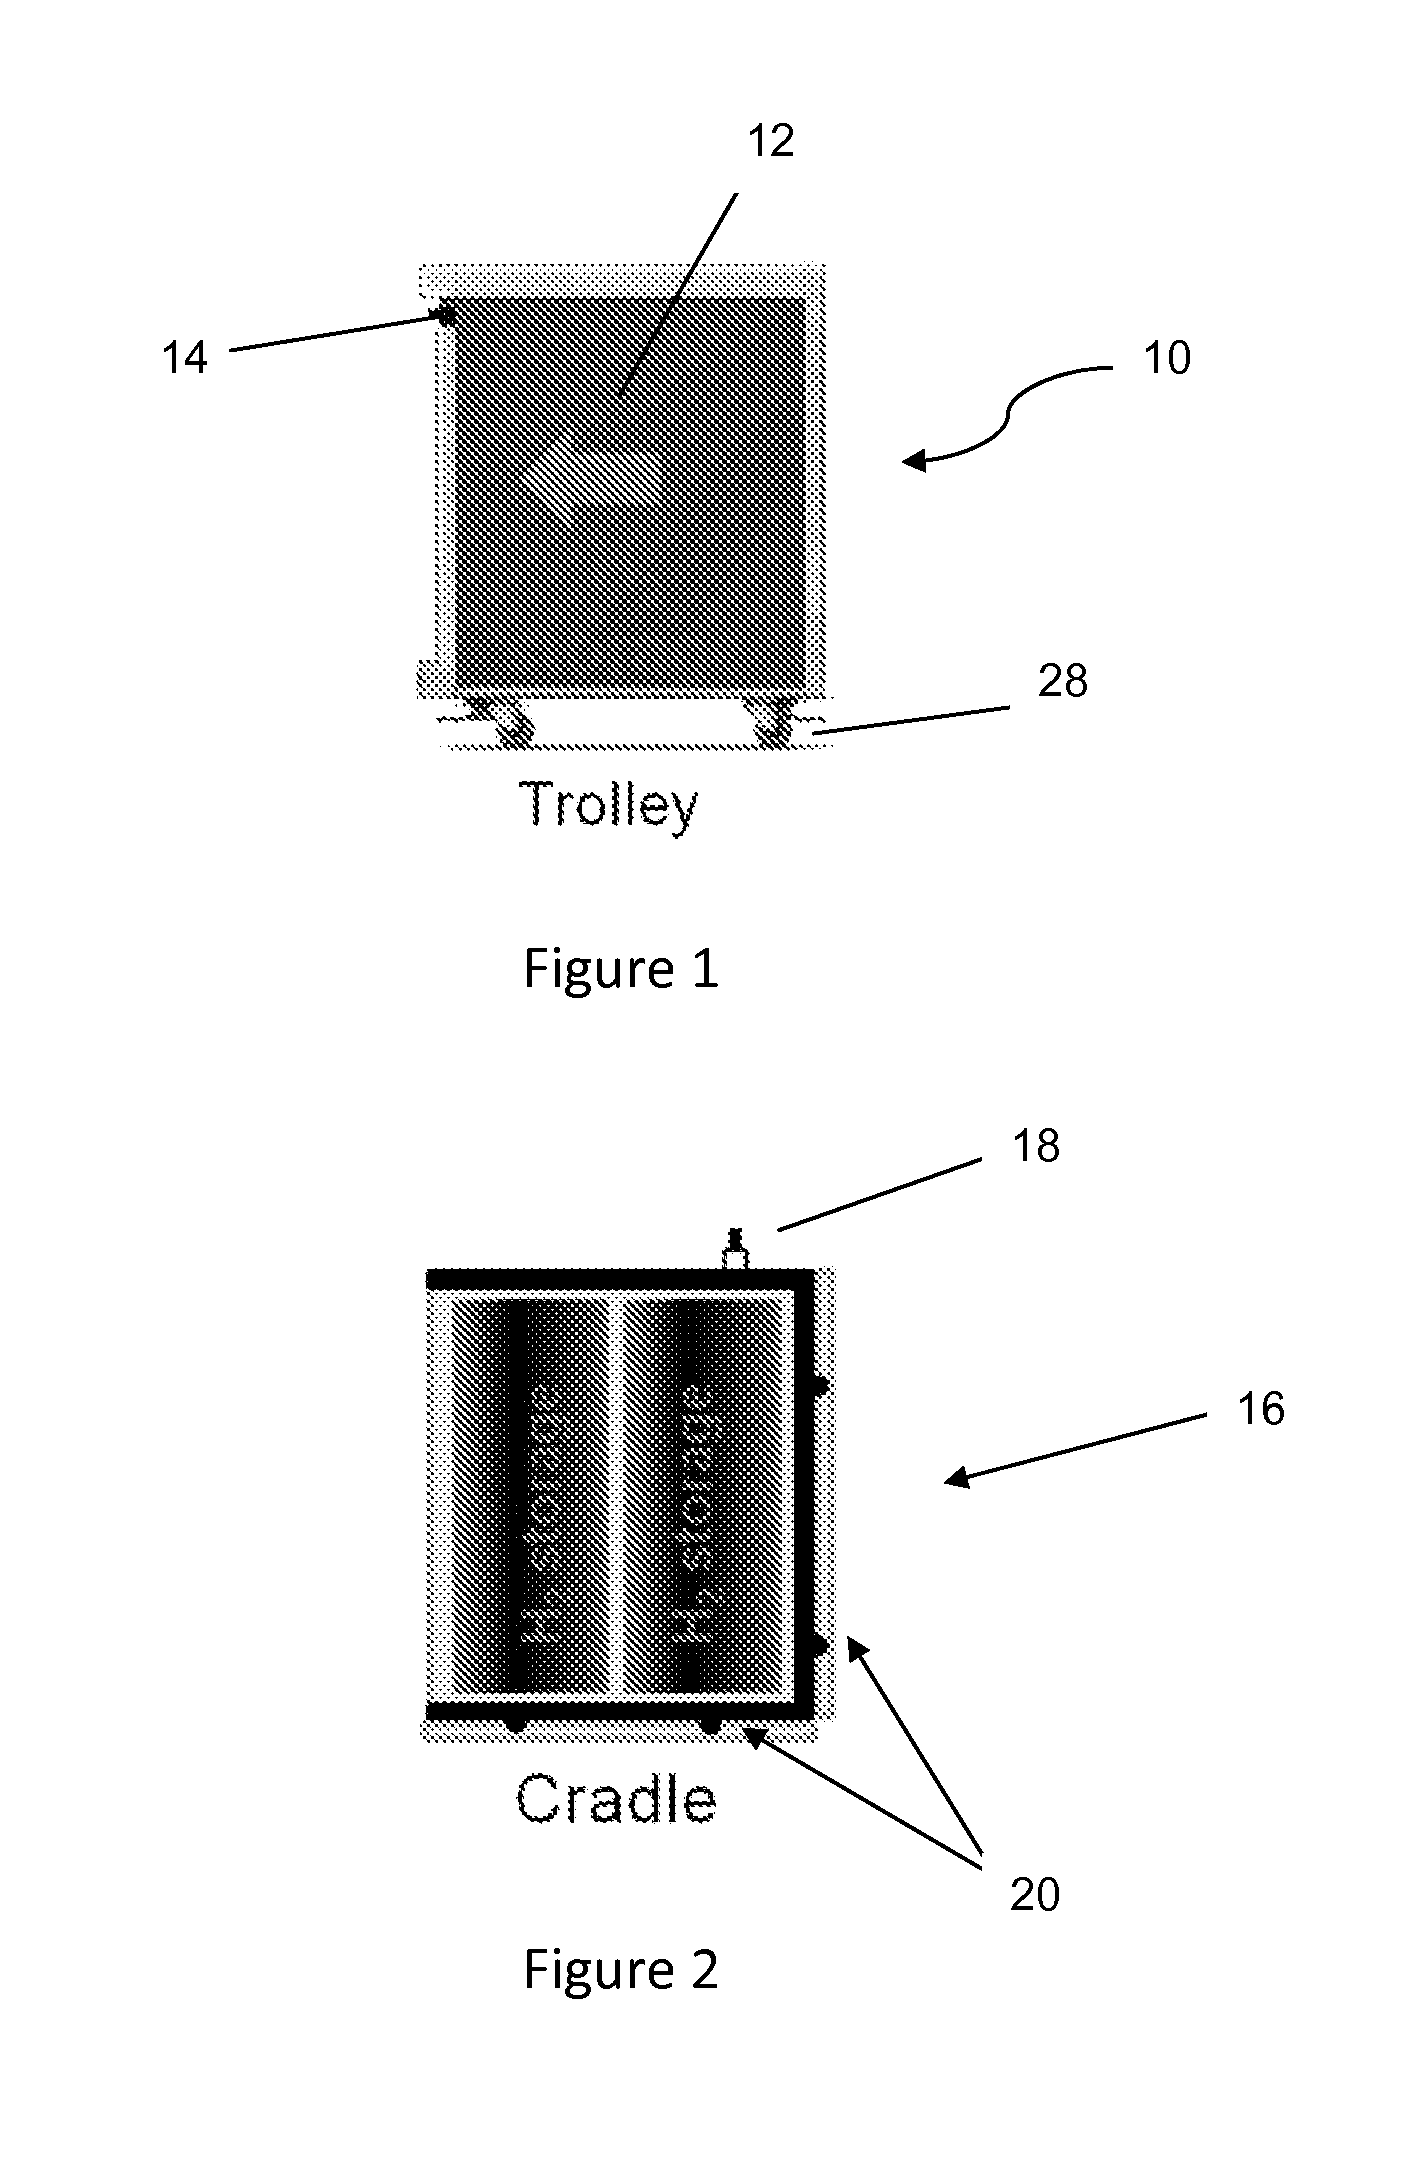 Removable storage for hydrogen on-board passenger transport vehicles such as aircraft